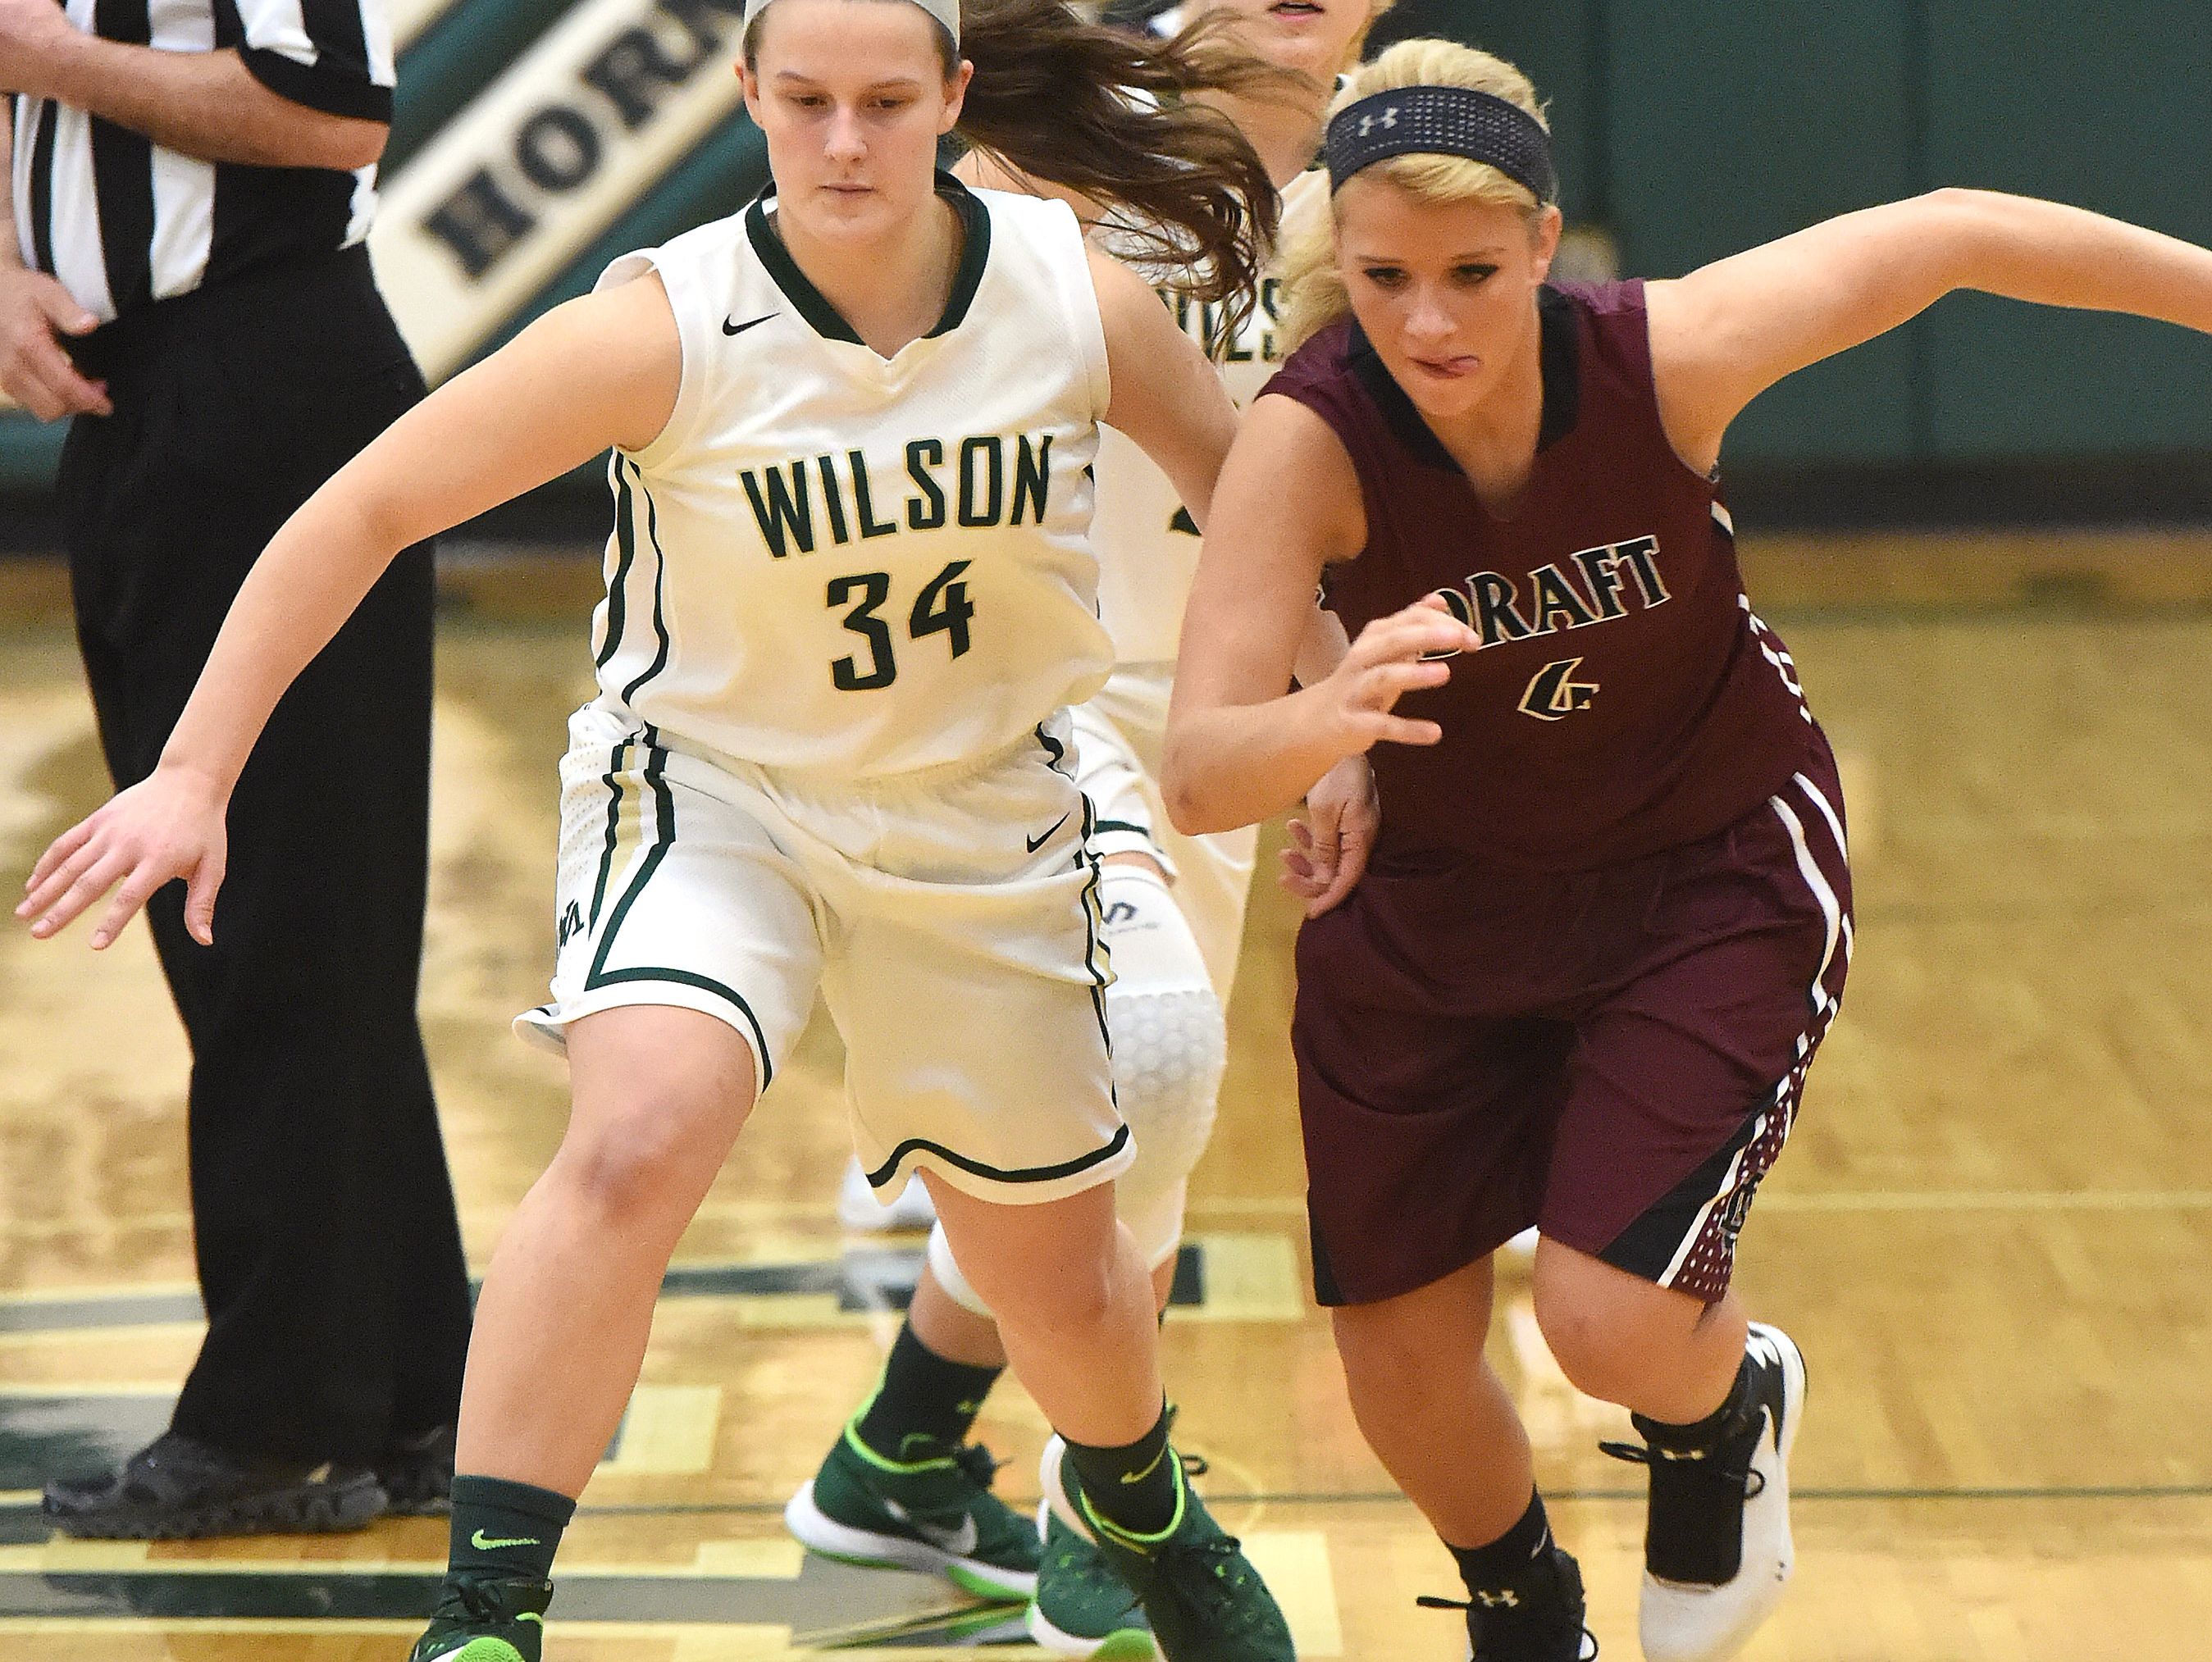 Wilson Memorial's Cheridan Hatfield, left, and Stuarts Draft's Danielle Brenneman are two of the top returning players in the Shenandoah District this season.